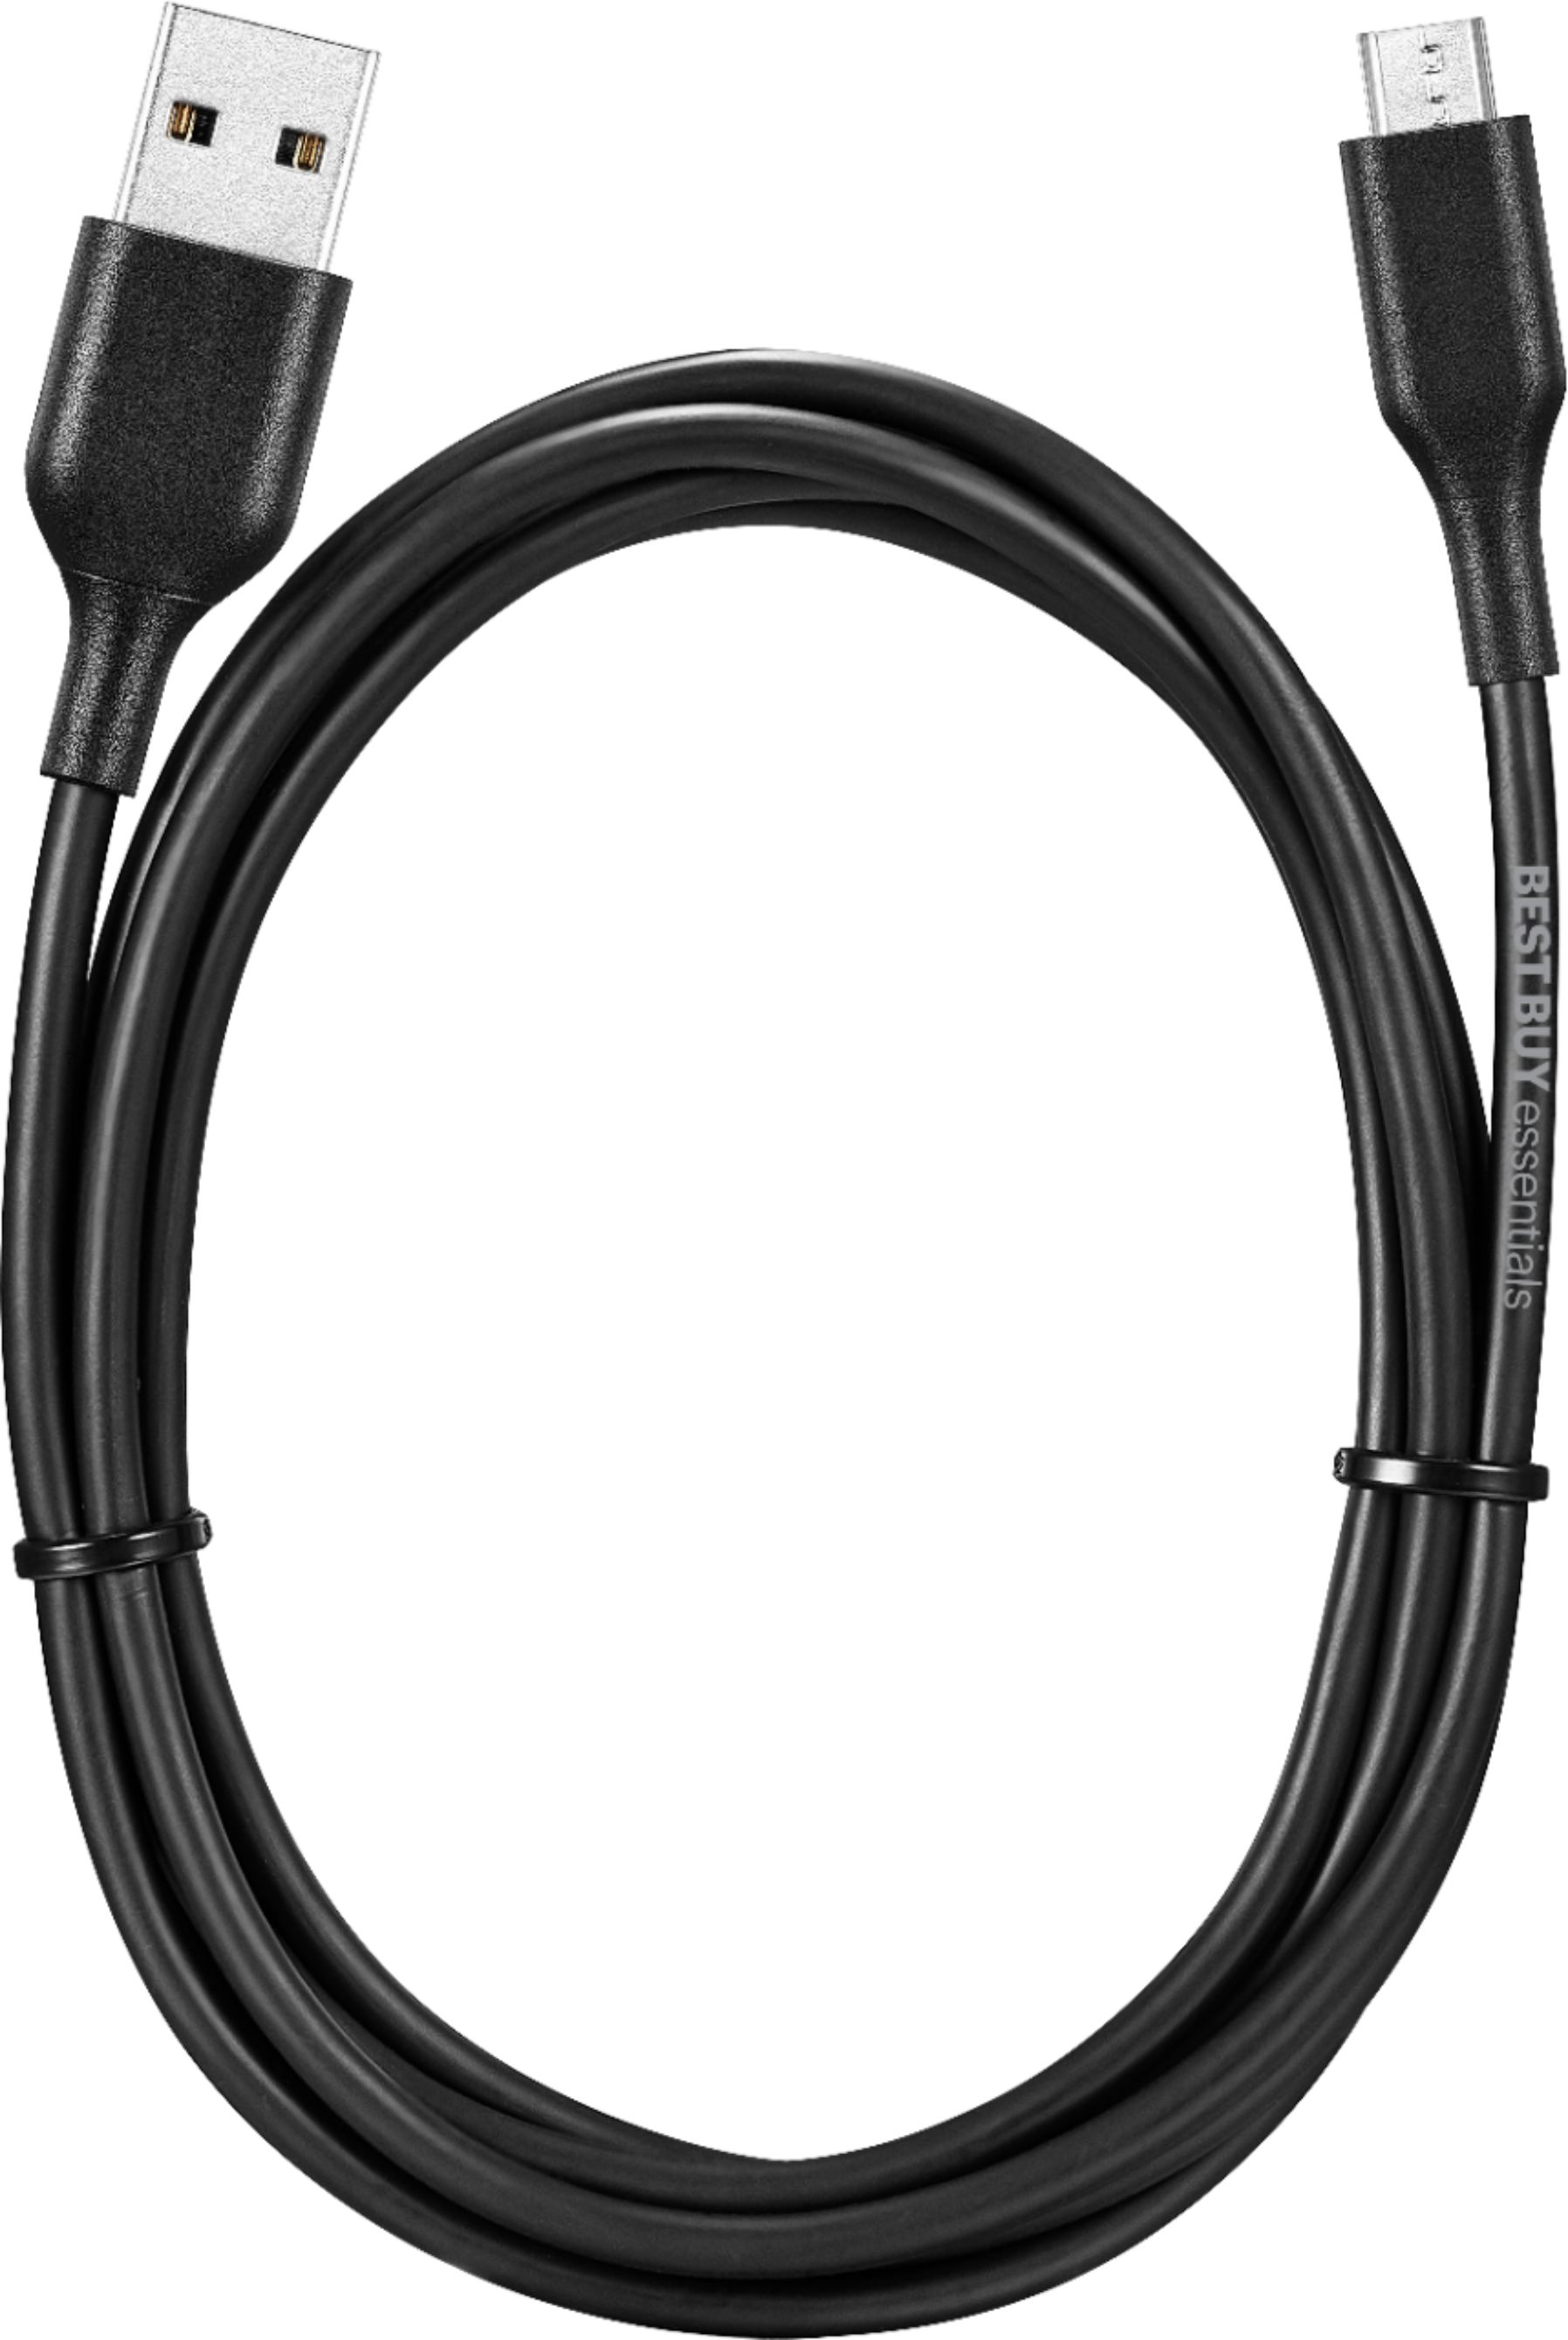 Politibetjent impressionisme Van Best Buy essentials™ 5' Micro USB to USB Charge-and-Sync Cable Black  BE-MMA522K - Best Buy